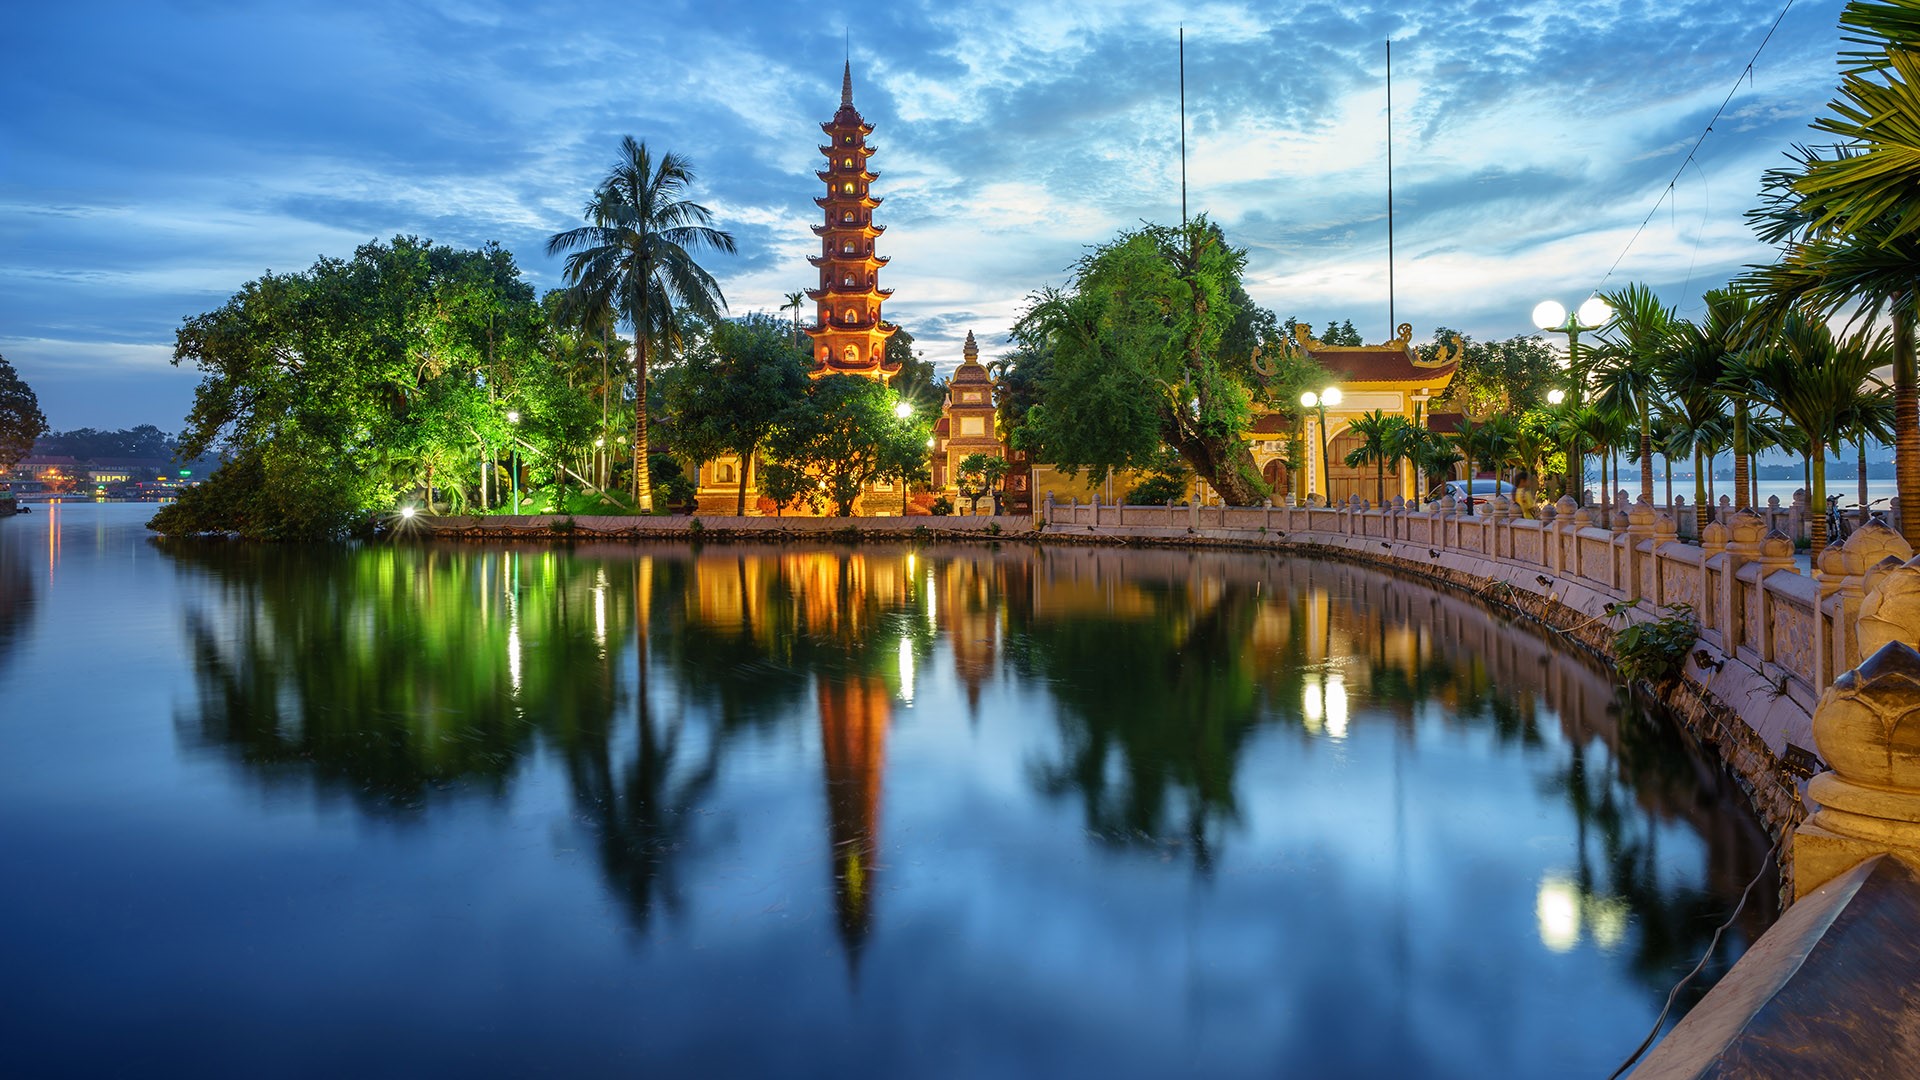 General 1920x1080 sky trees lights lake temple Vietnam Hanoi clouds Asian architecture reflection tower